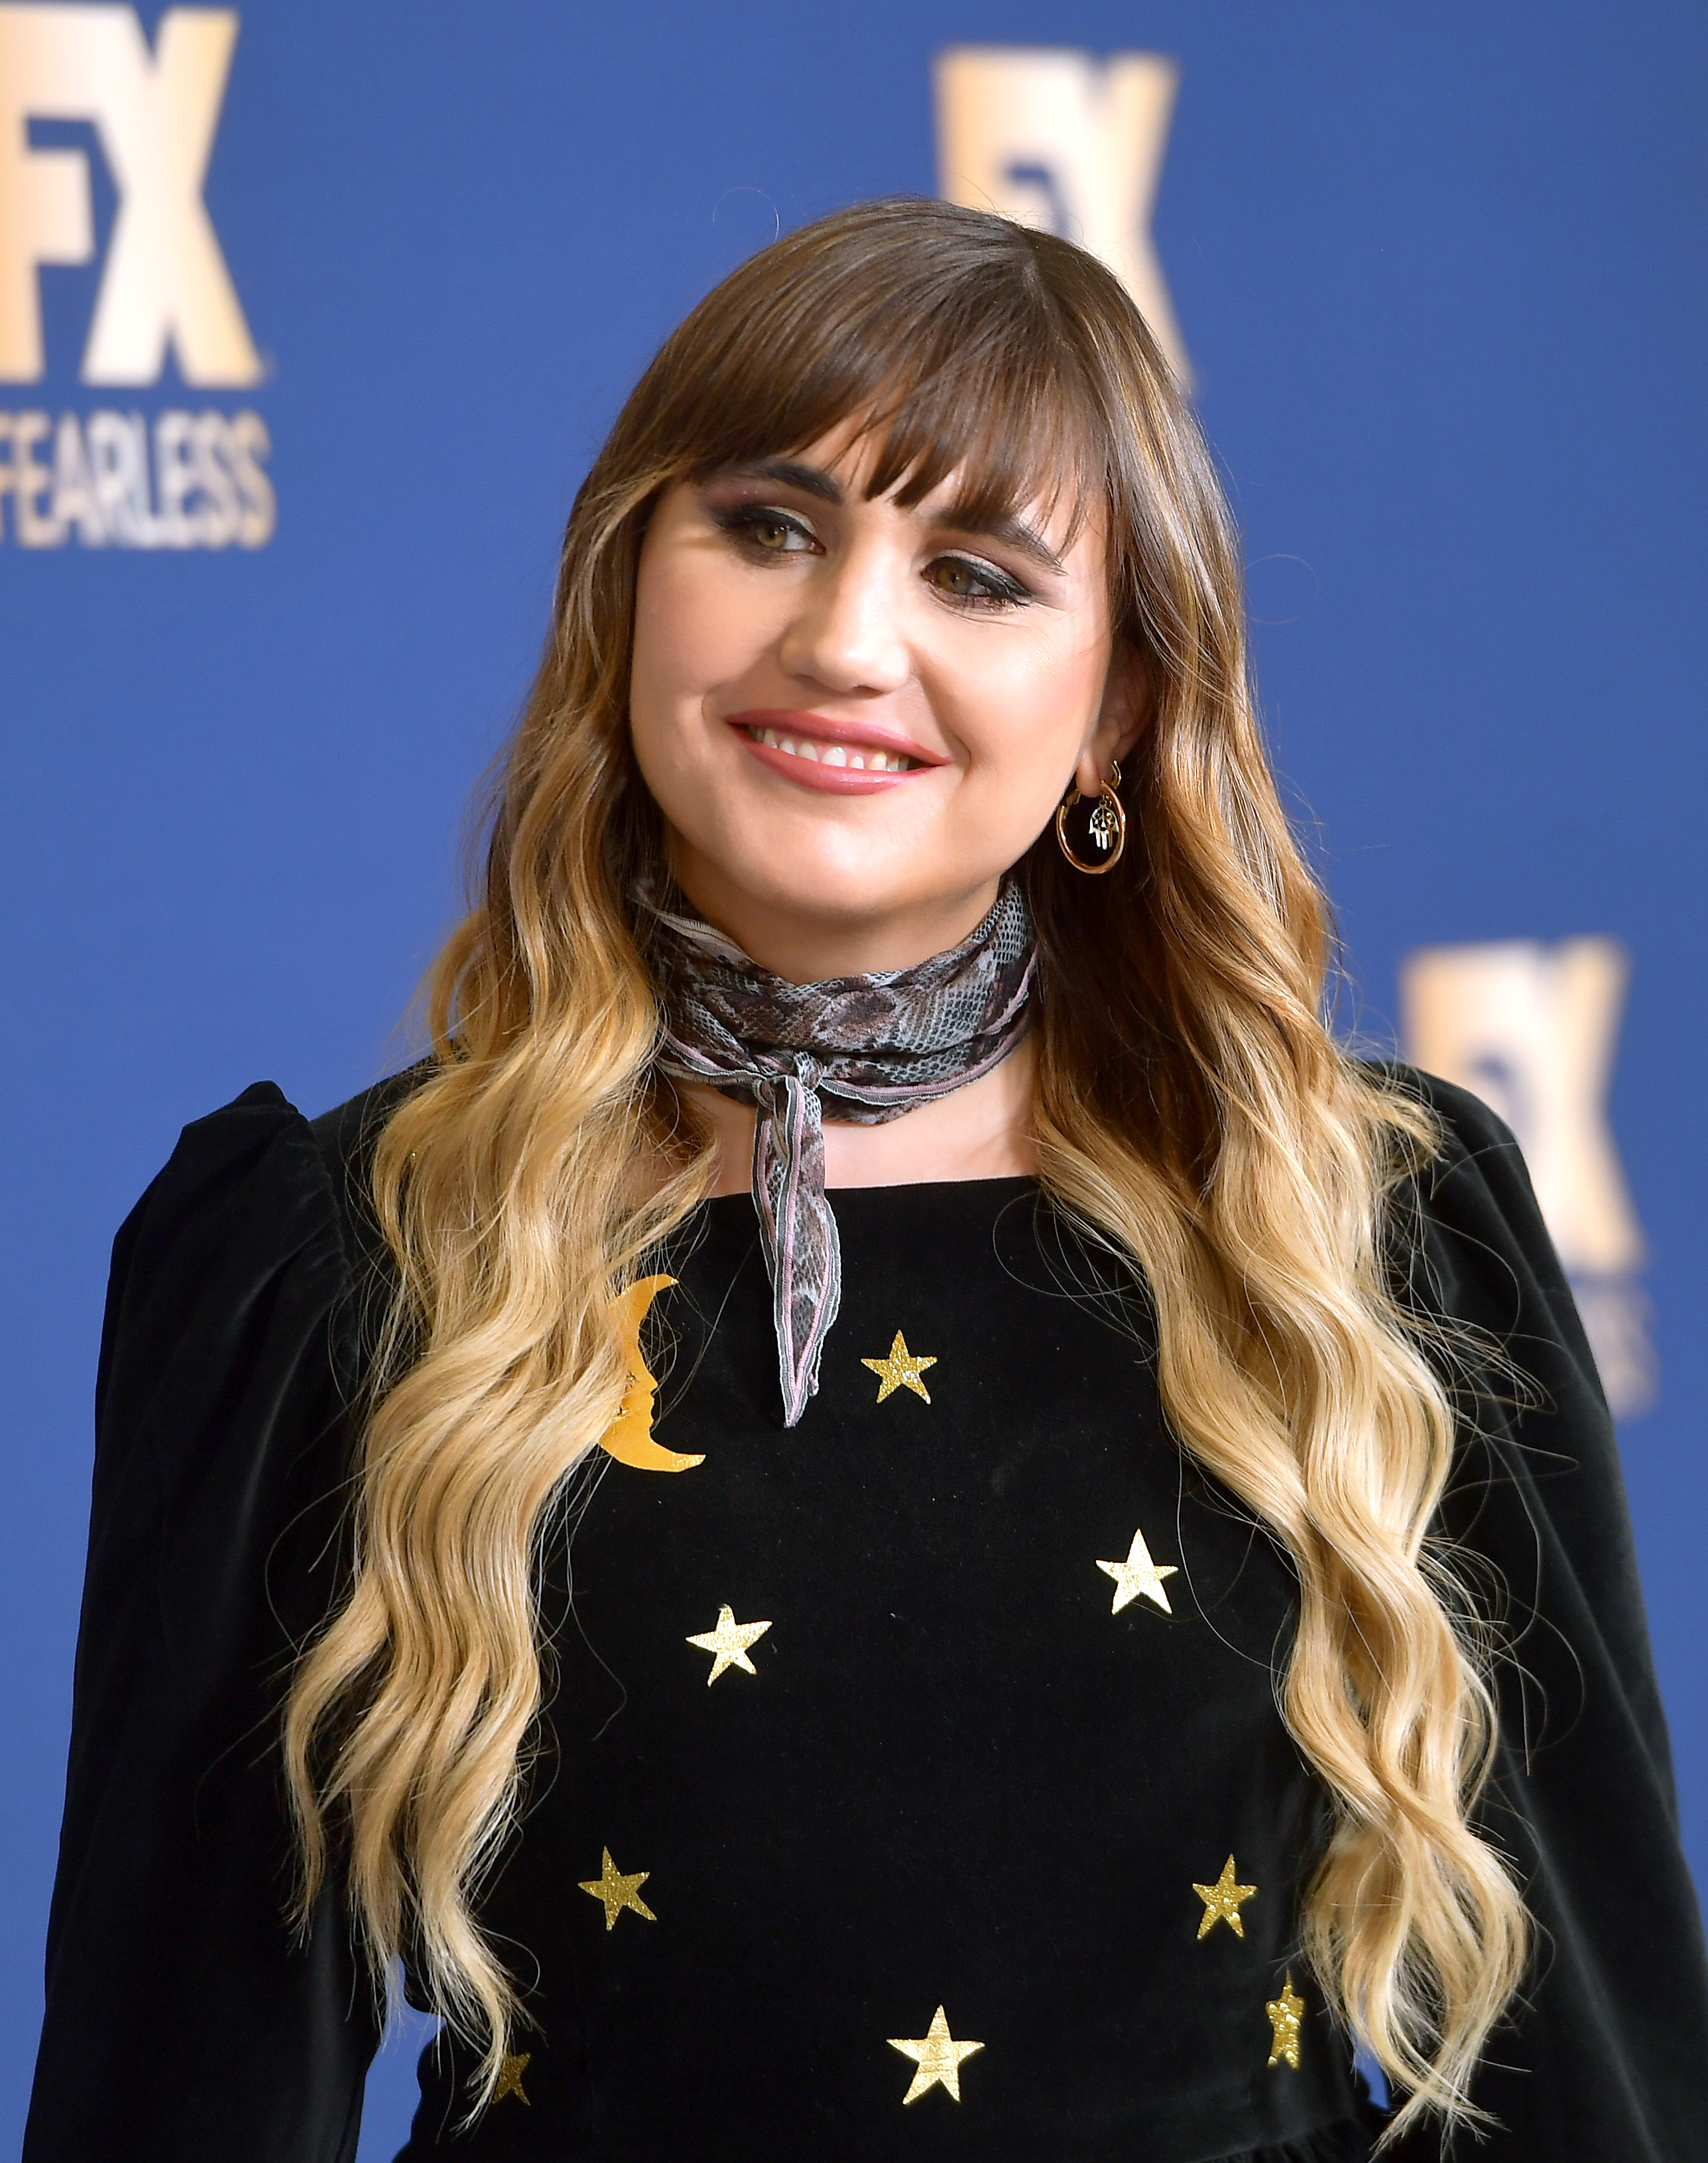 Natasia Demetriou of 'What We Do in the Shadows' attends the FX Networks' Star Walk Winter Press Tour 2020 at The Langham Huntington, Pasadena on January 09, 2020 in Pasadena, California. | Source: Getty Images